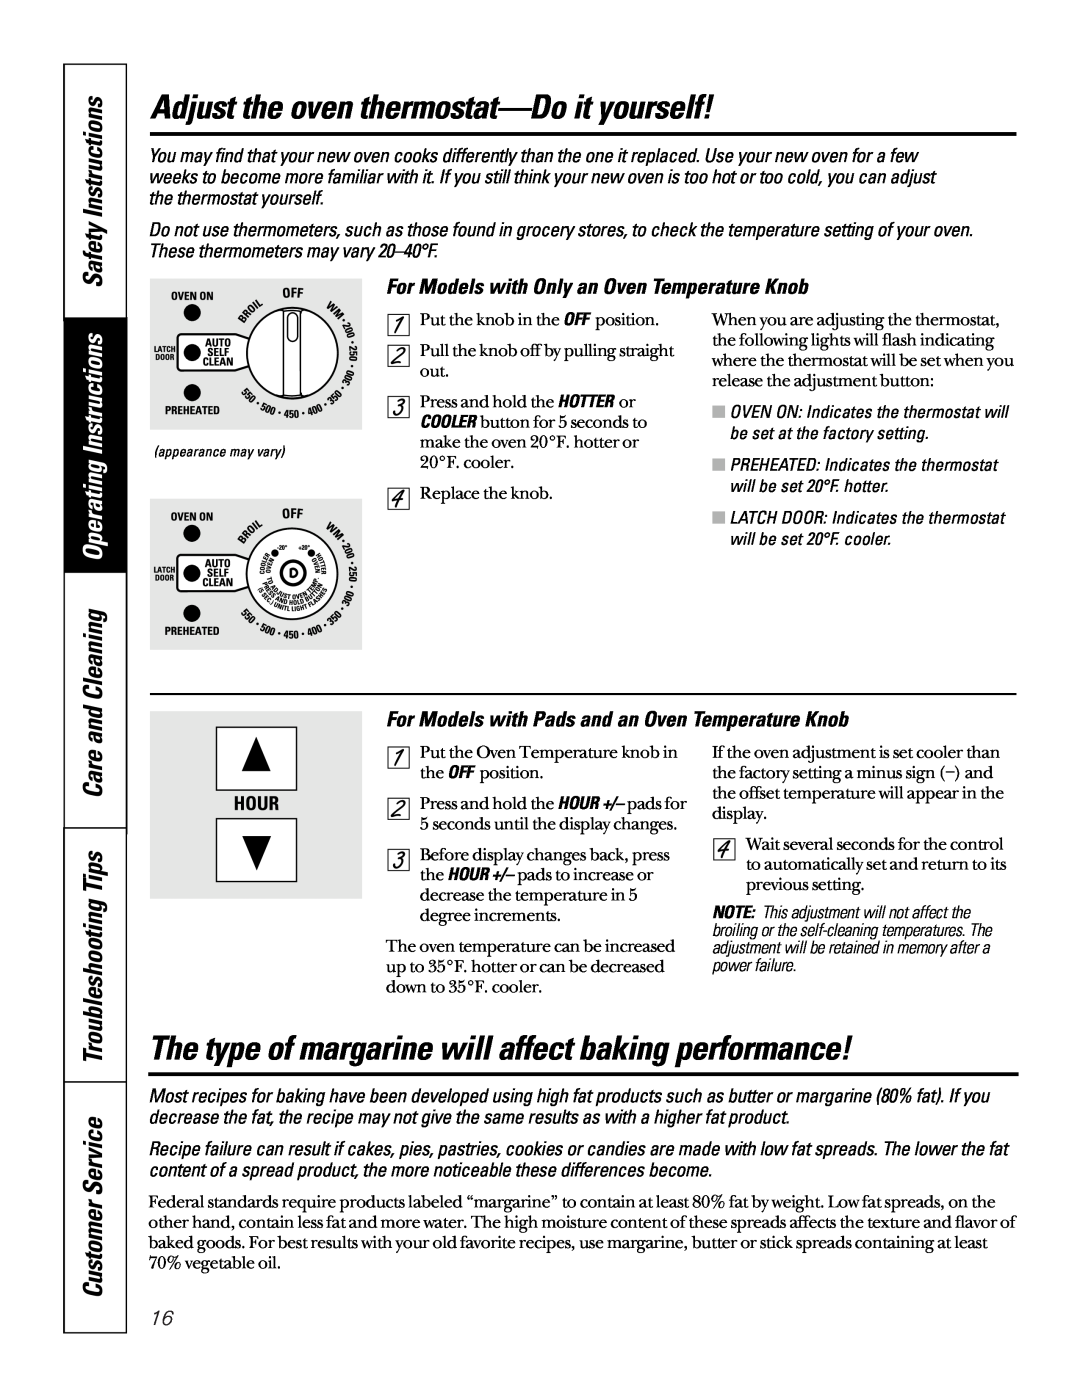 GE JBP23, JBP61, RB756 Adjust the oven thermostat-Doit yourself, Cleaning Operating Instructions, Troubleshooting Tips Care 